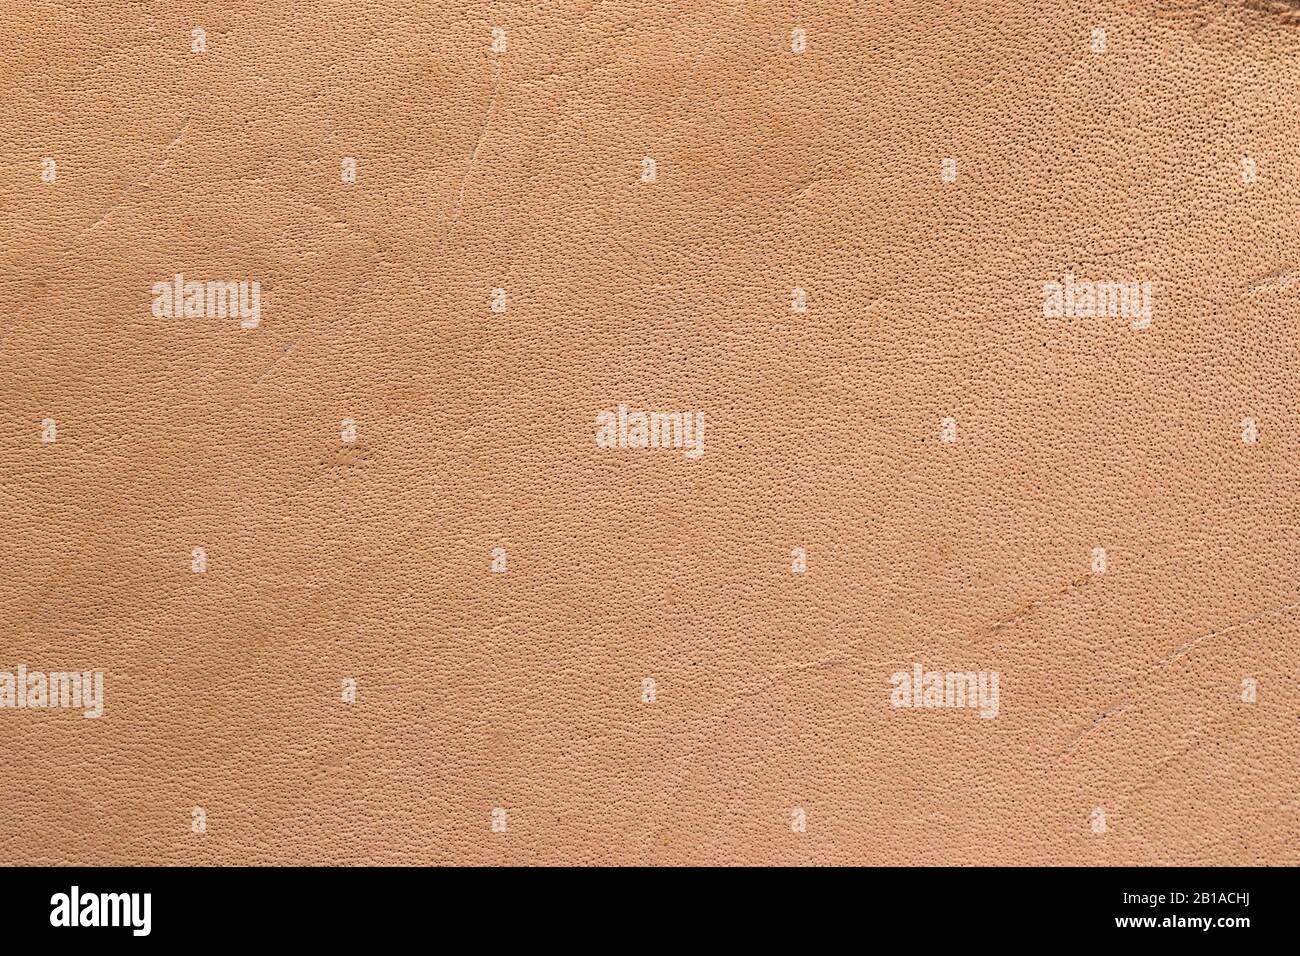 Natural vegetable tanned leather closeup macro full frame texture showing top grain and scratch wear marks Stock Photo